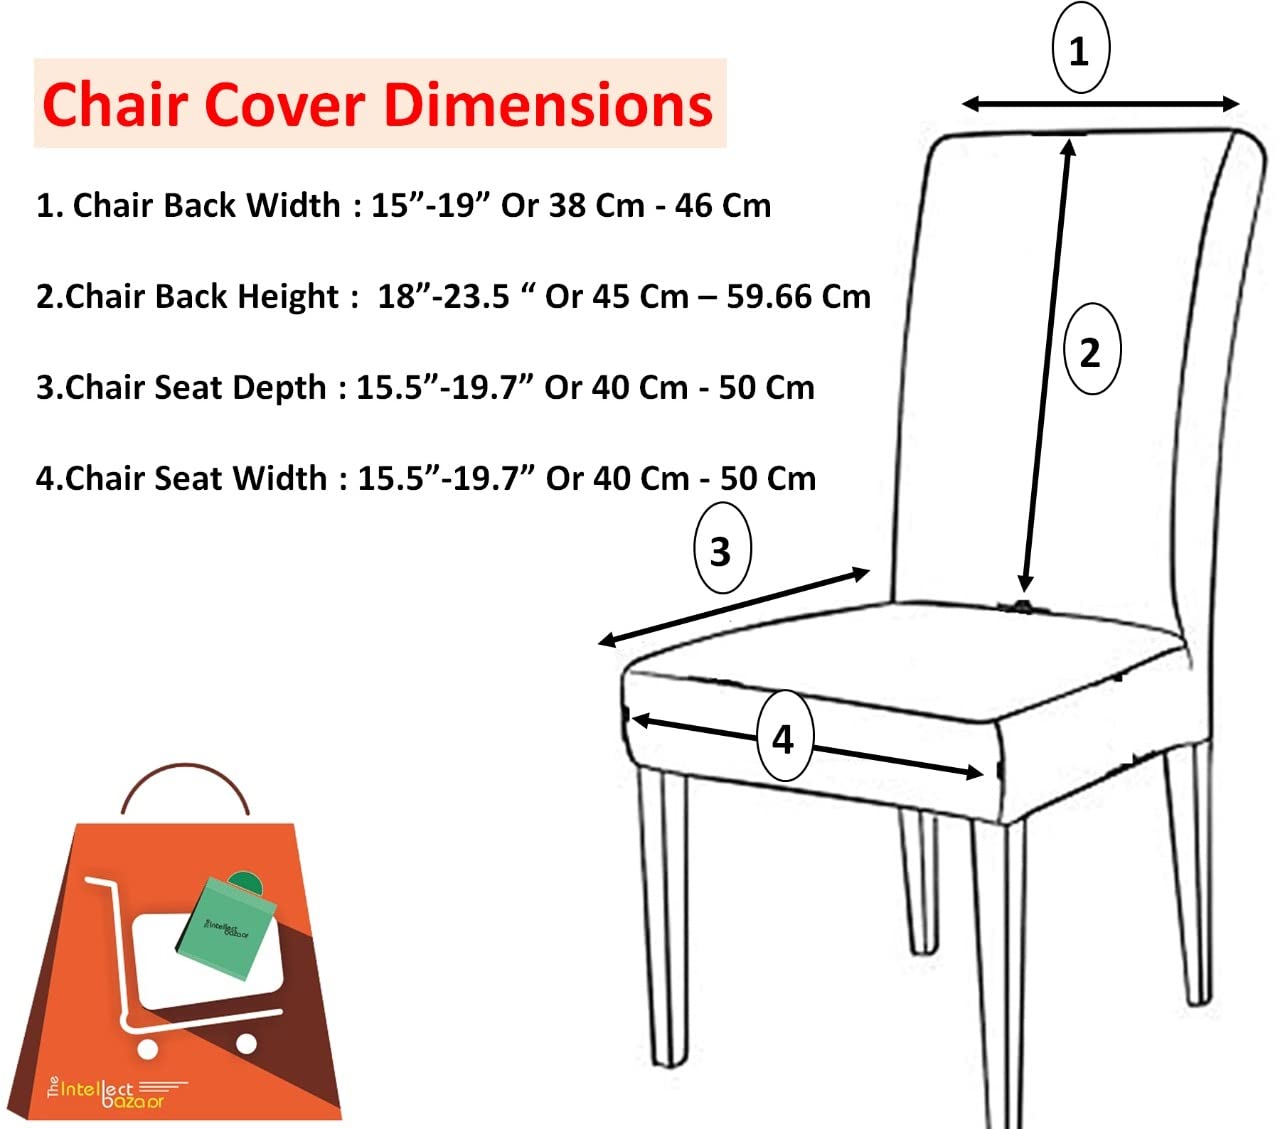 TIB Floral Elastic Stretchable Removable Washable Dining Chair Cover Set of 1 Chair Protector Seat Slipcover (Multicolor)